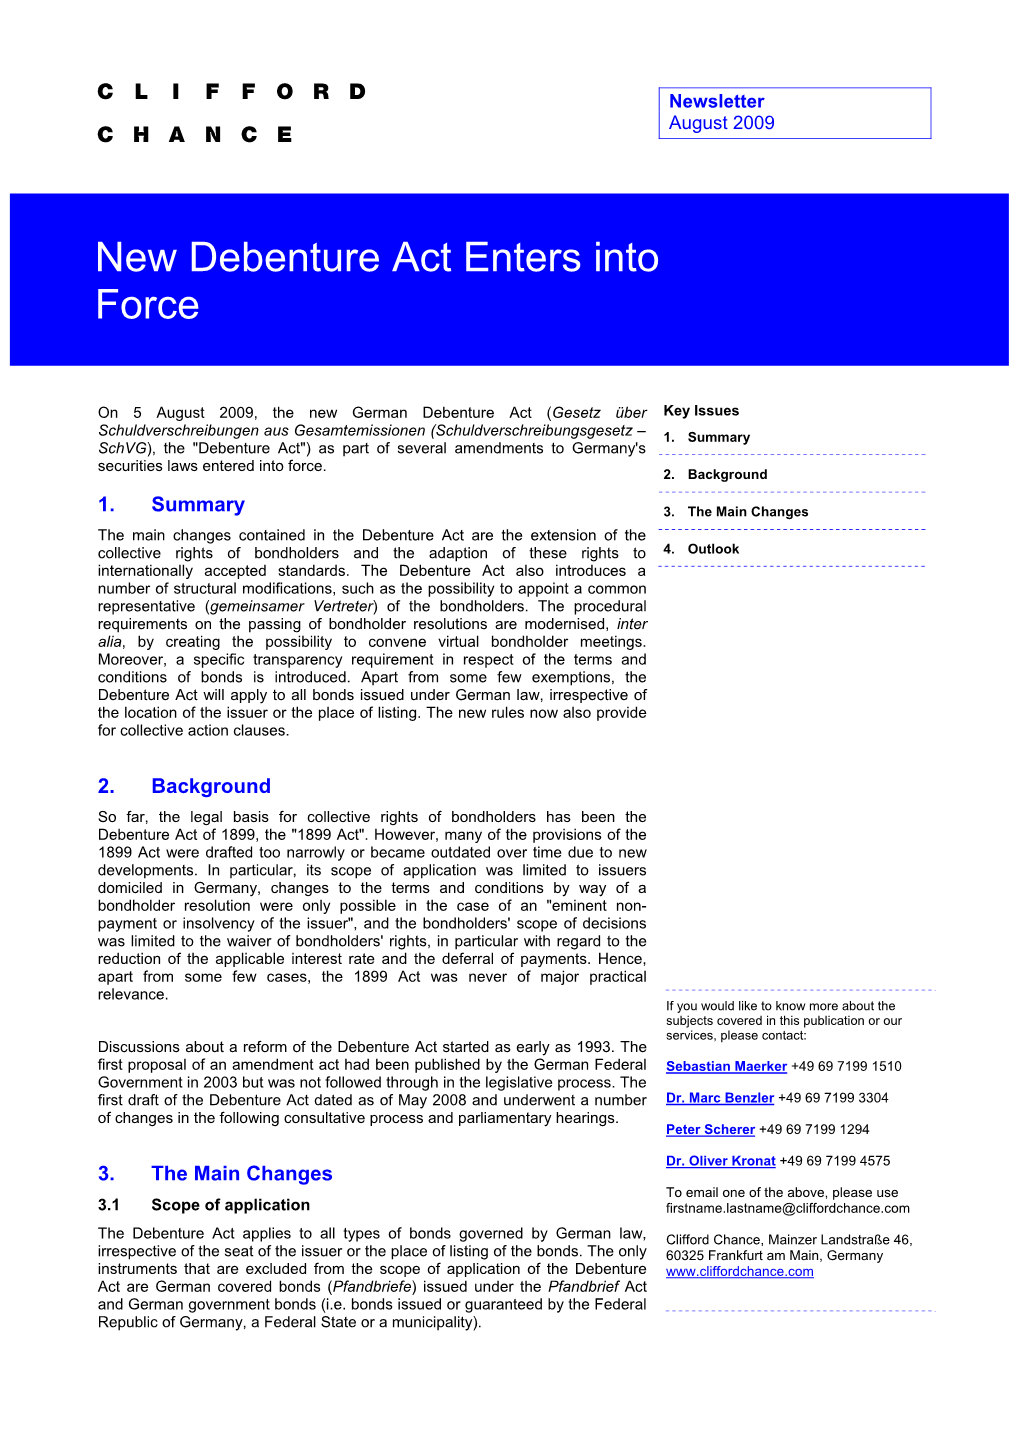 New Debenture Act Enters Into Force